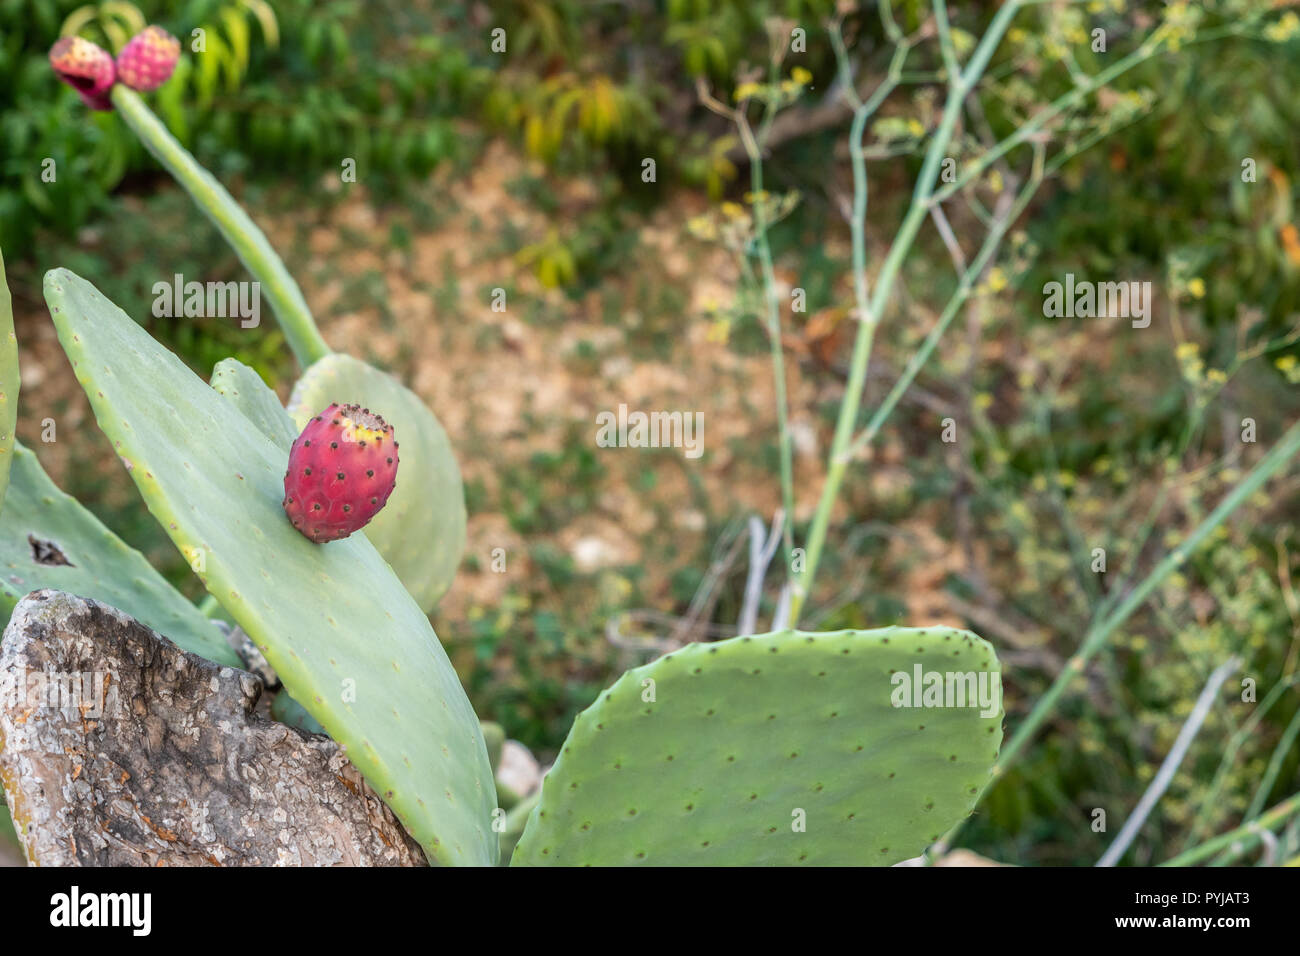 Opuntia or prickly pear in the summer season. Higo fruit. Horizontal. background out of focus Stock Photo